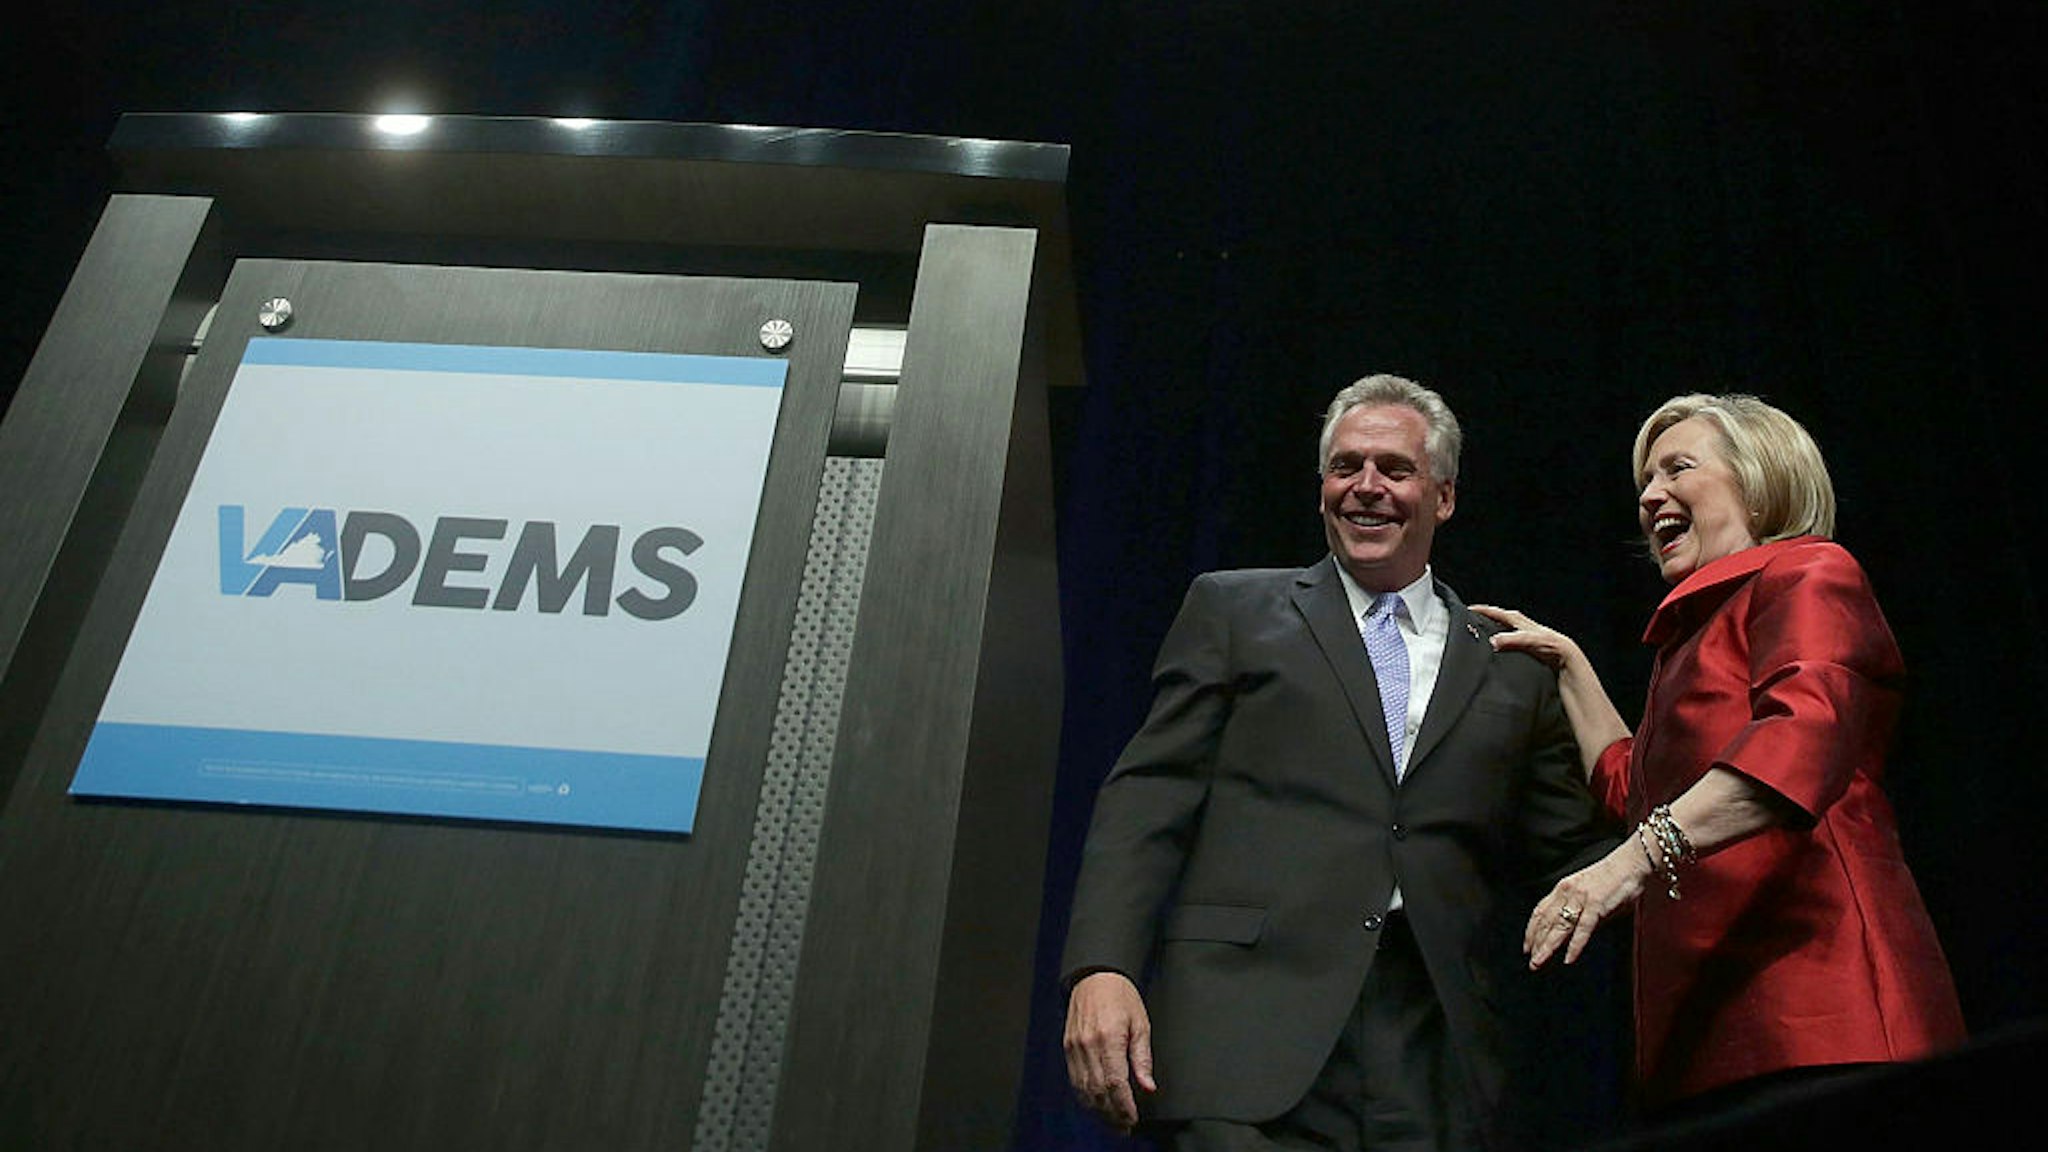 Democratic U.S. presidential hopeful and former U.S. Secretary of the State Hillary Clinton and Virginia Governor Terry McAuliffe share a moment during the Democratic Party of Virginia Jefferson-Jackson dinner June 26, 2015 at George Mason University's Patriot Center in Fairfax, Virginia.